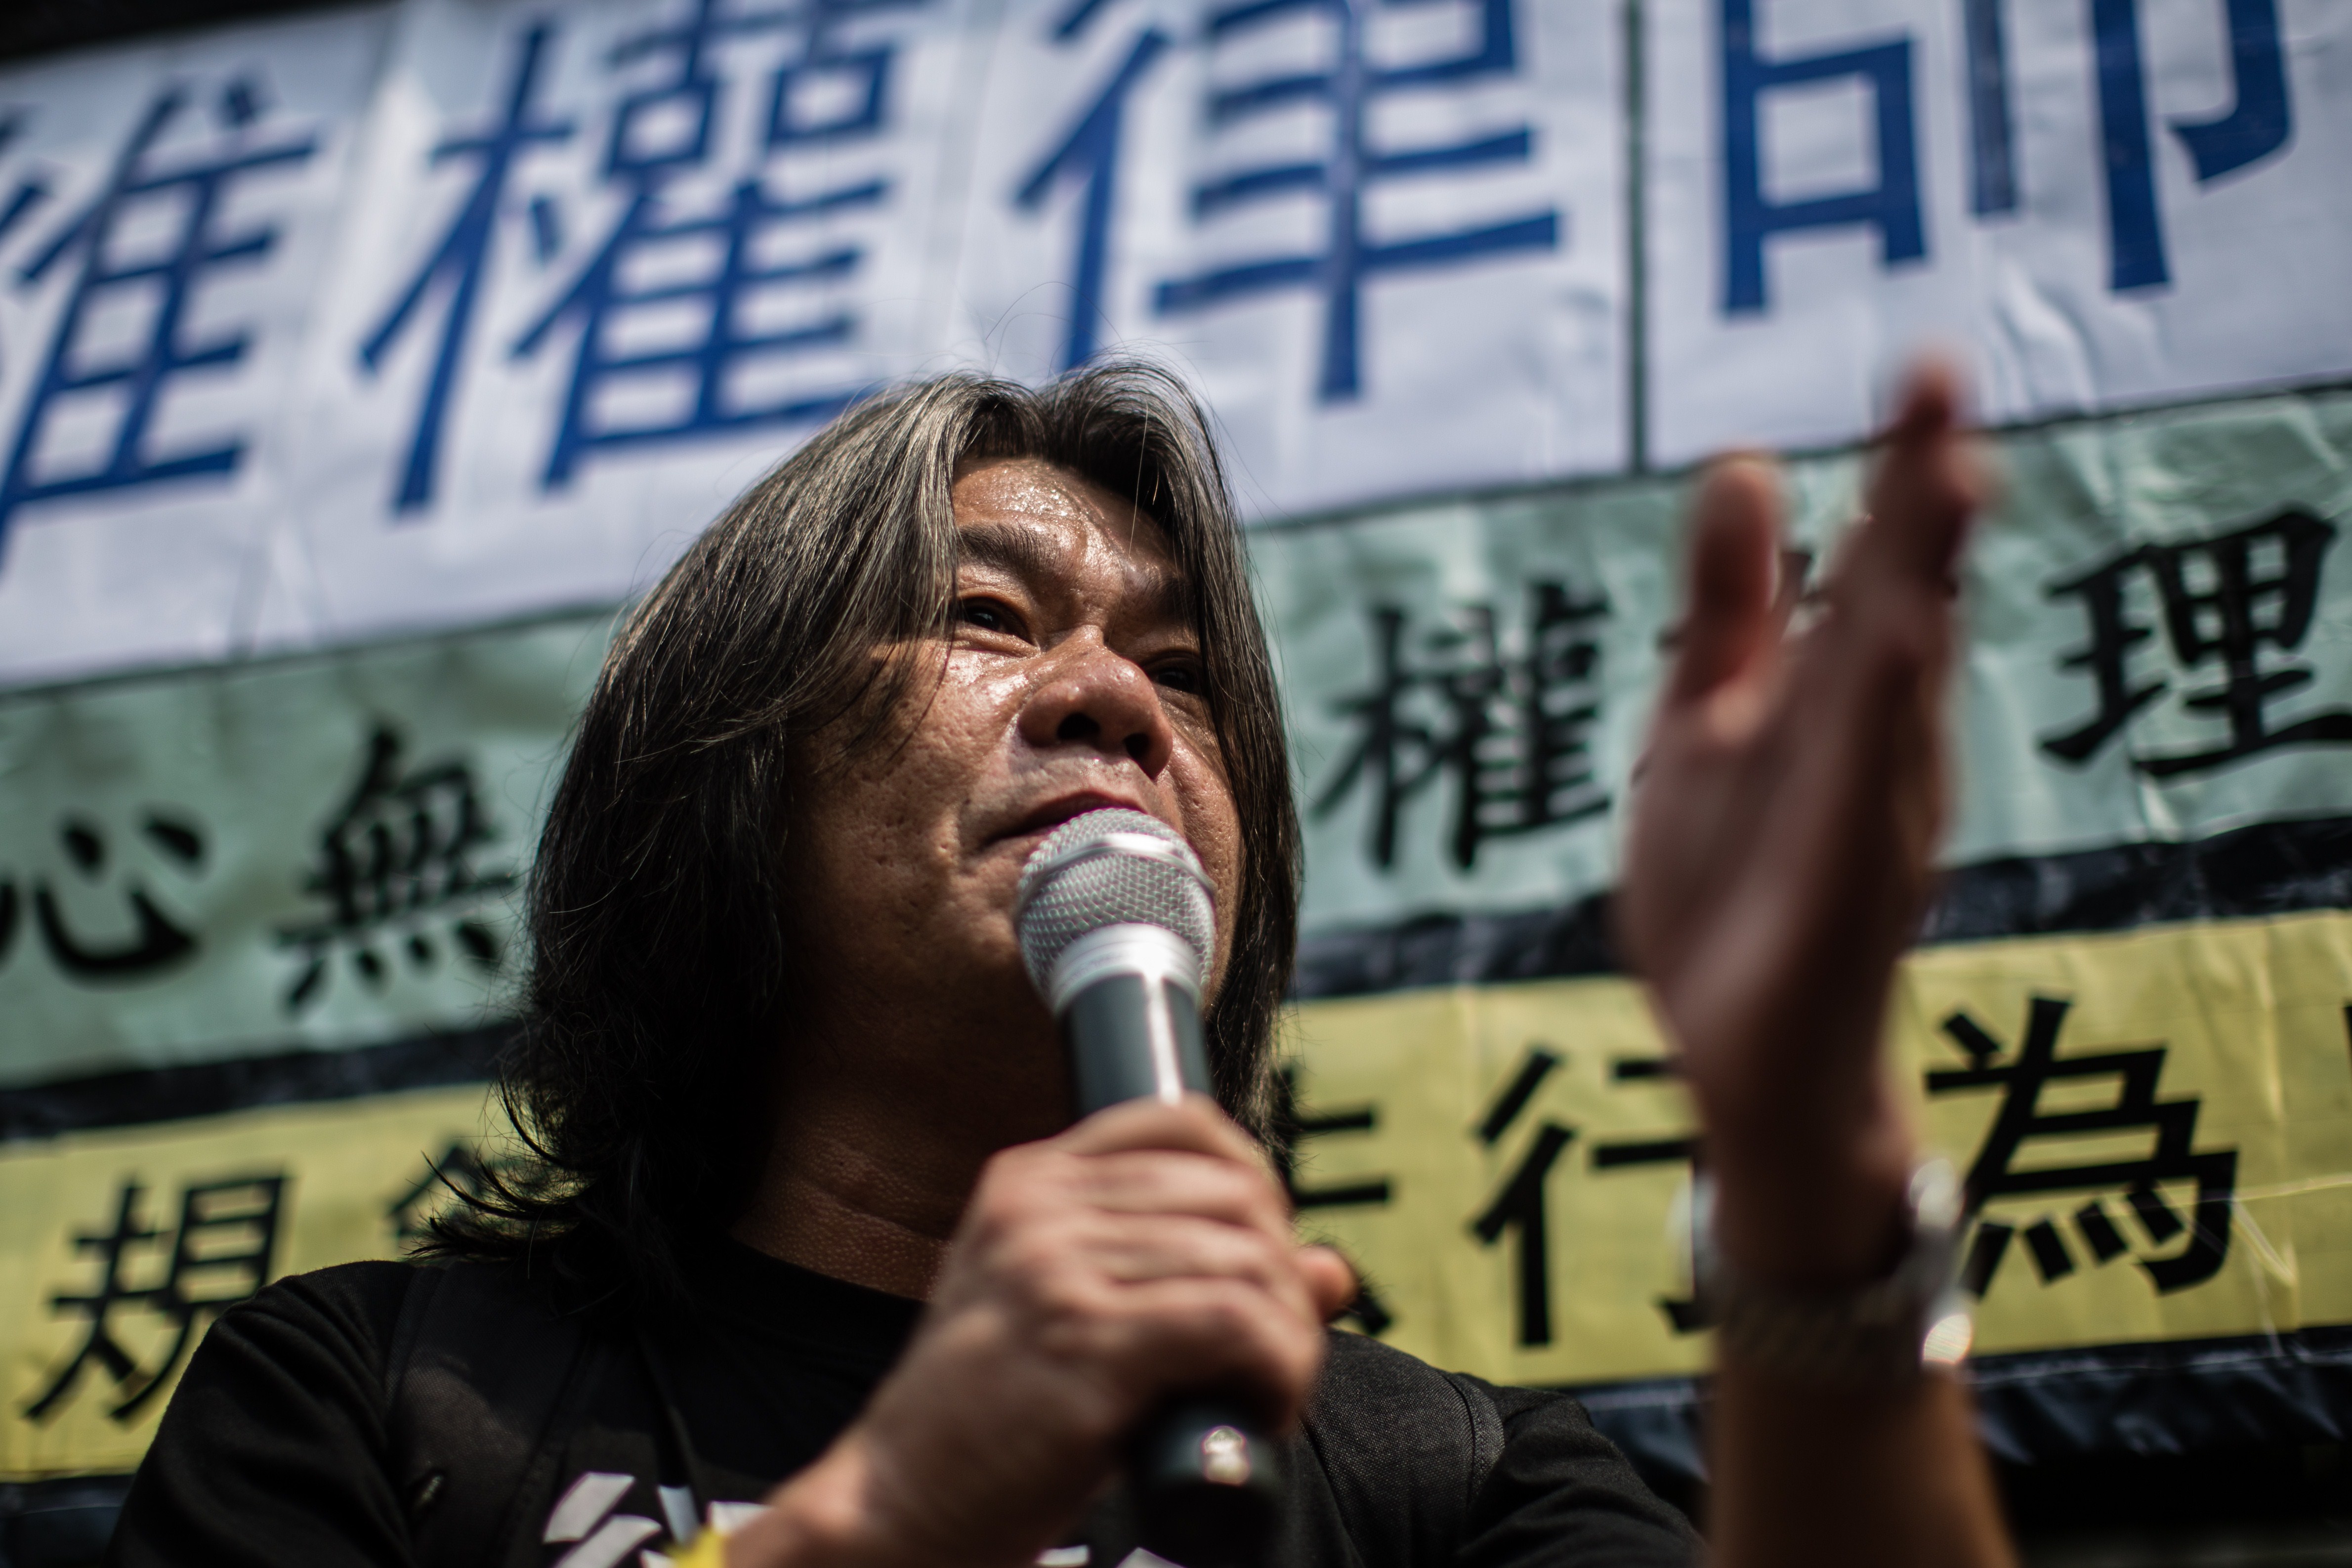 Hong Kong legislator Leung Kwok-hung, known as Long Hair, of the League of Social Democrats speaks during a protest in Hong Kong on July 12, 2015 (Anthony Wallace—AFP/Getty Images)